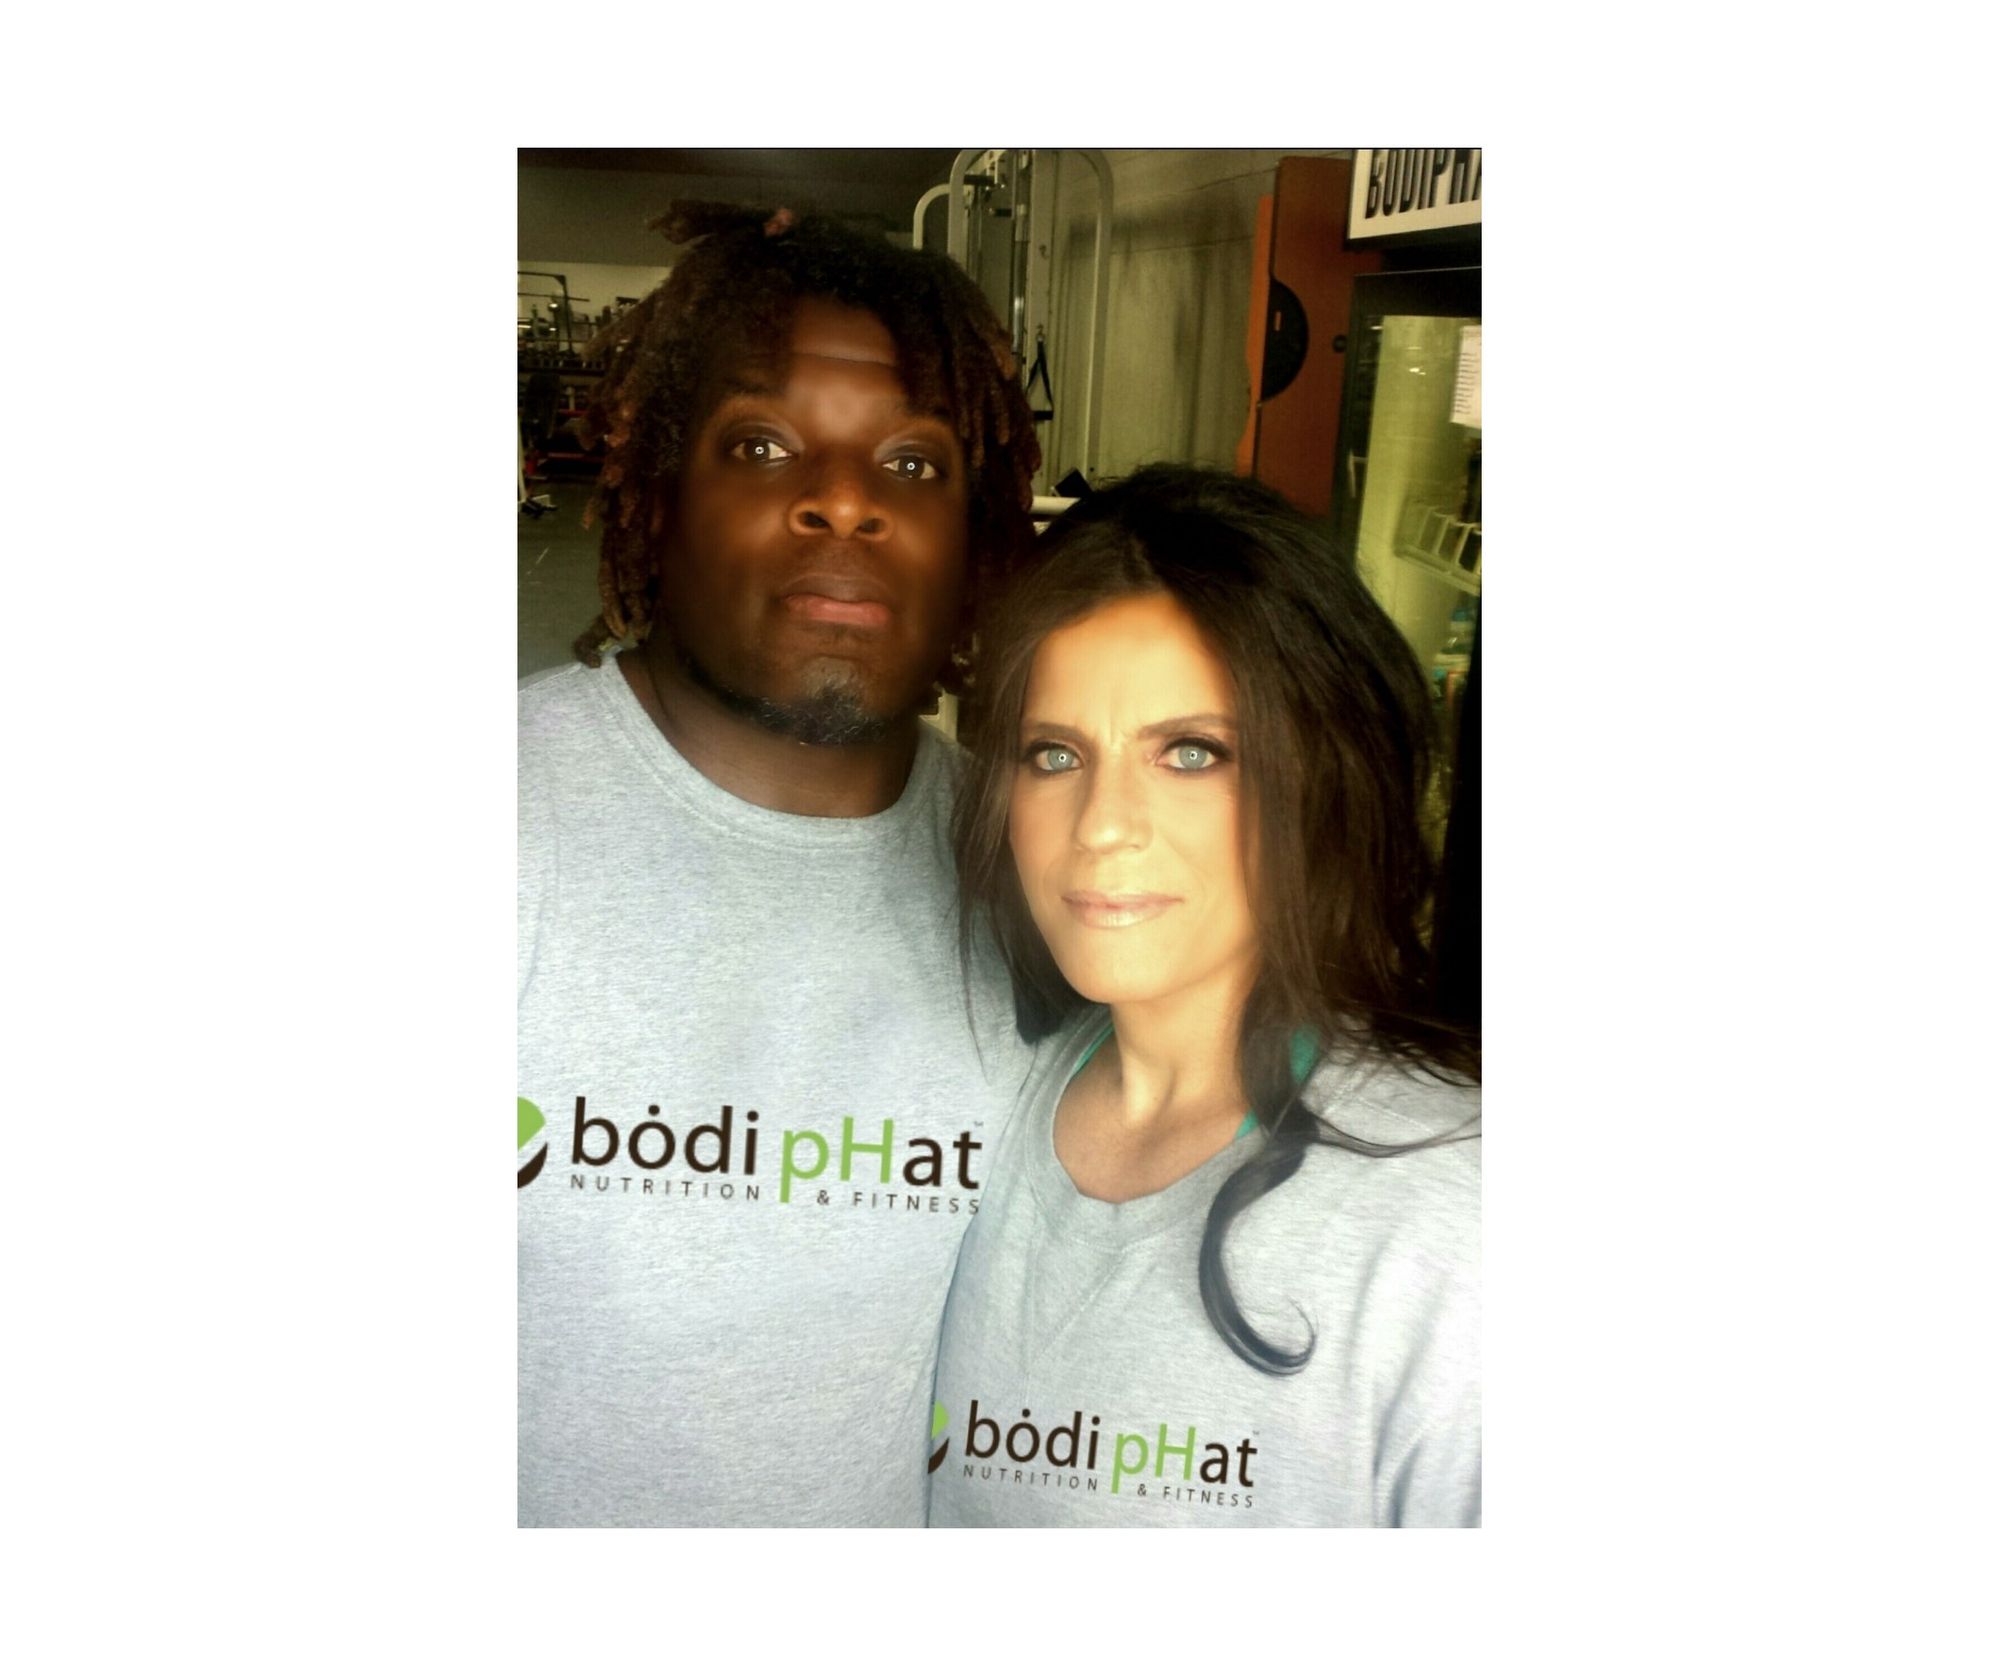 Total Body Wellness - Bodiphat Nutrition and Fitness